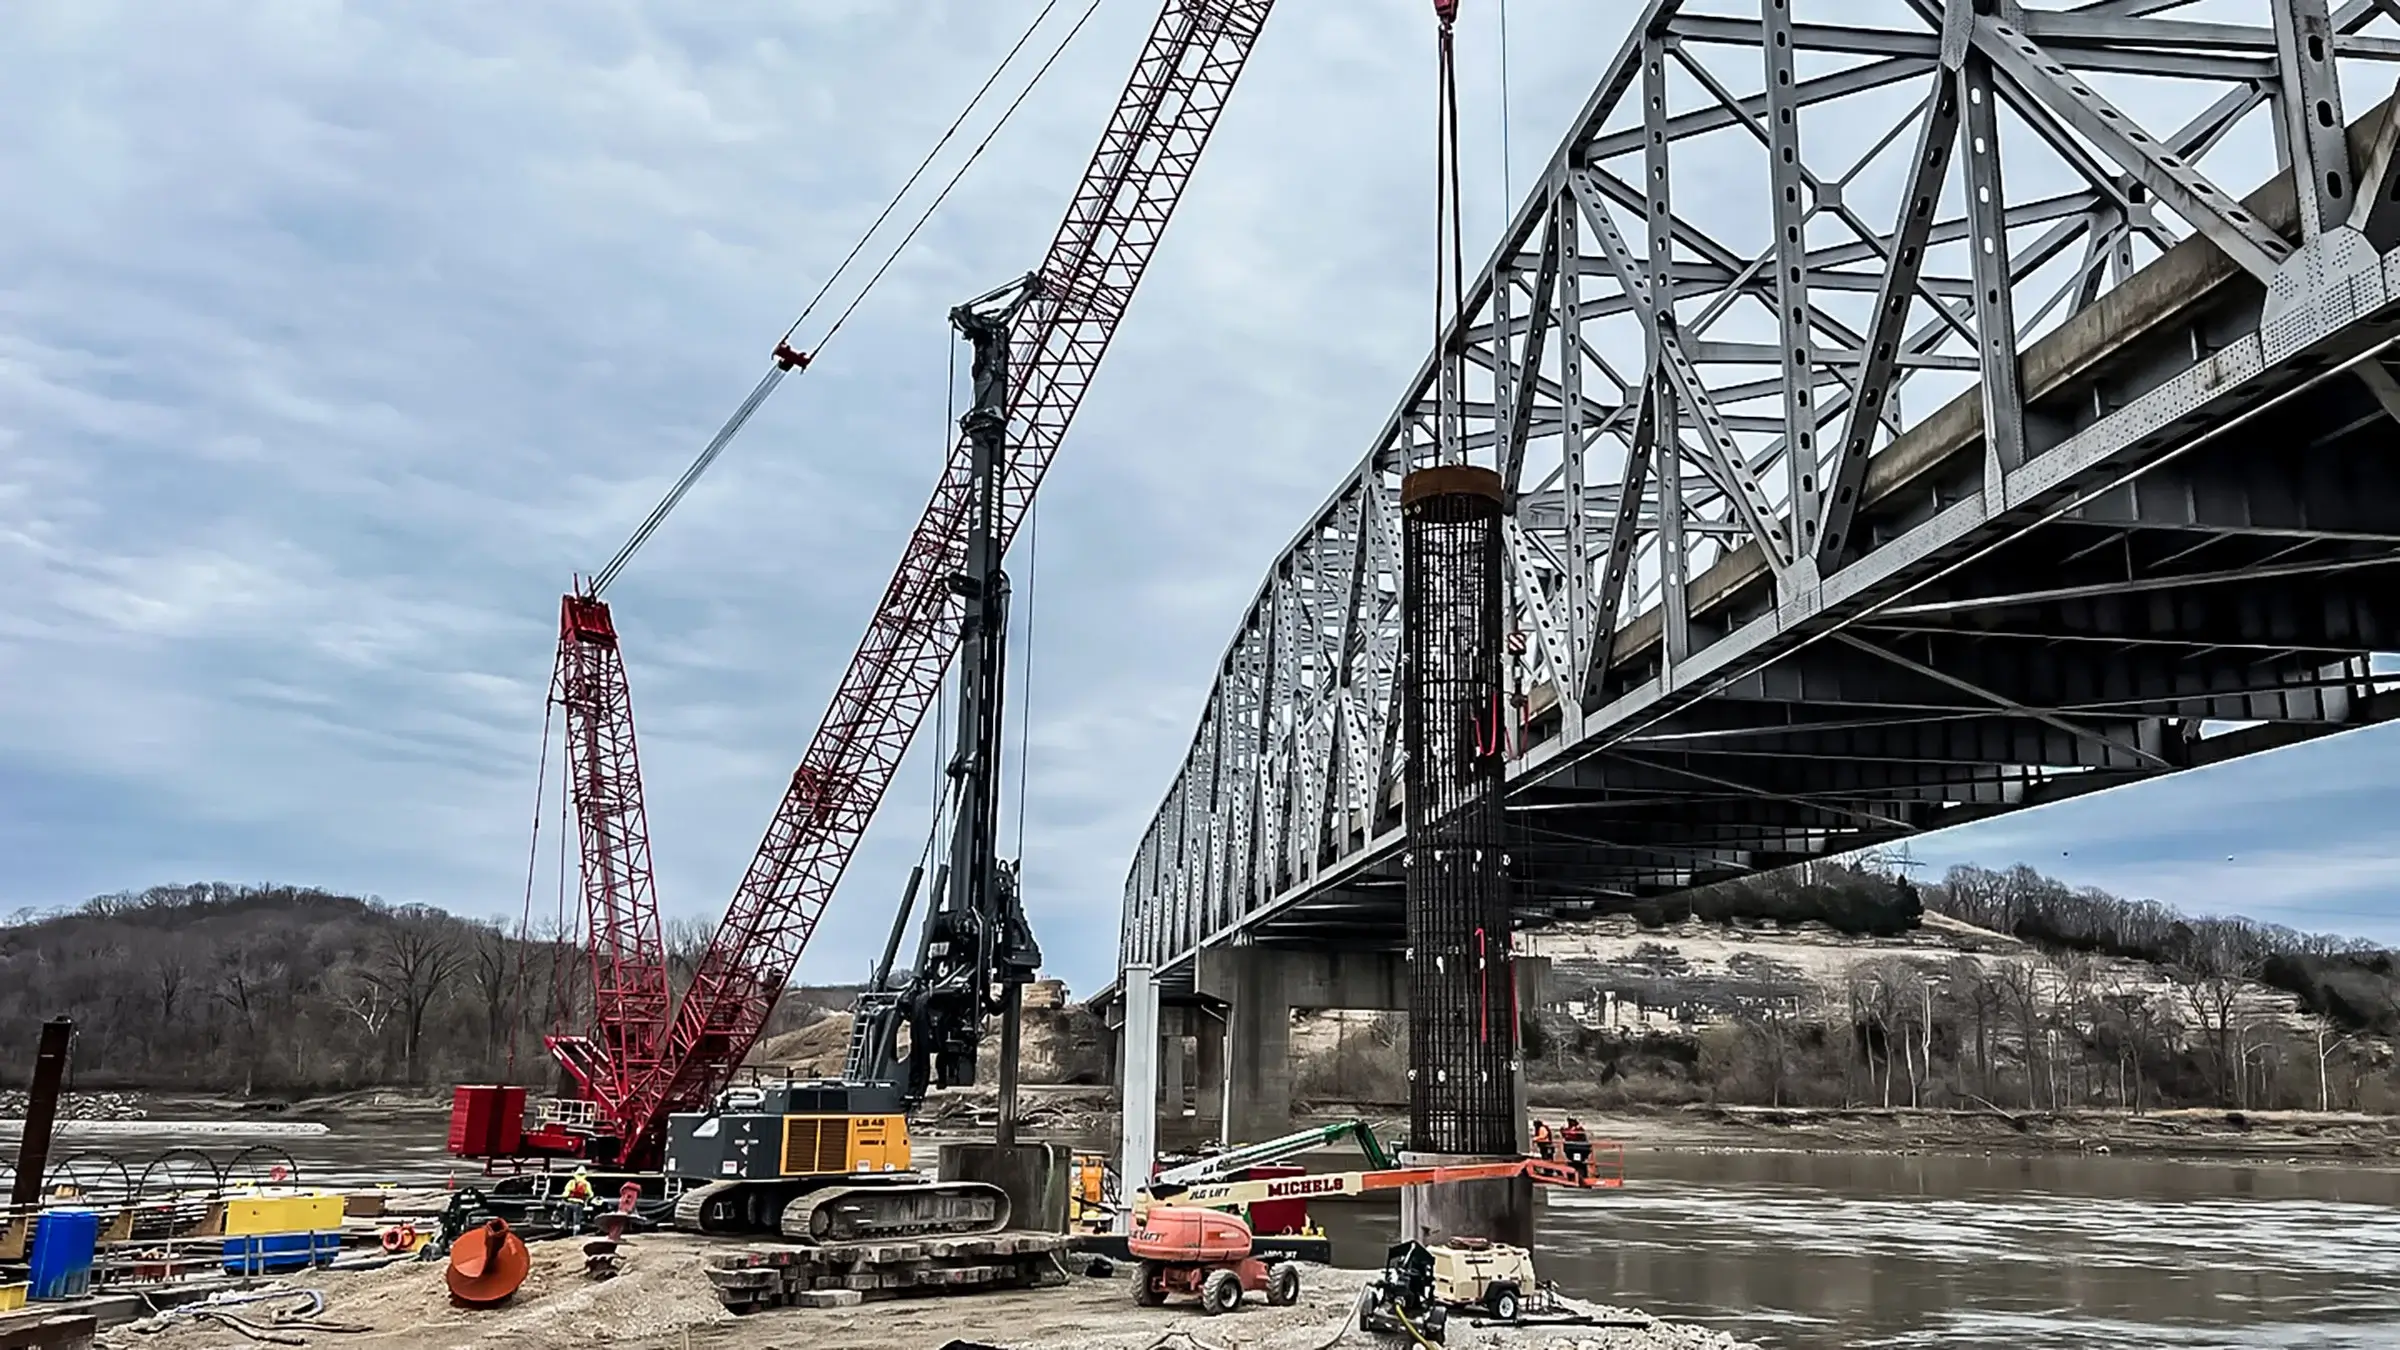 Cranes extended while working on a bridge in Rocheport Missouri